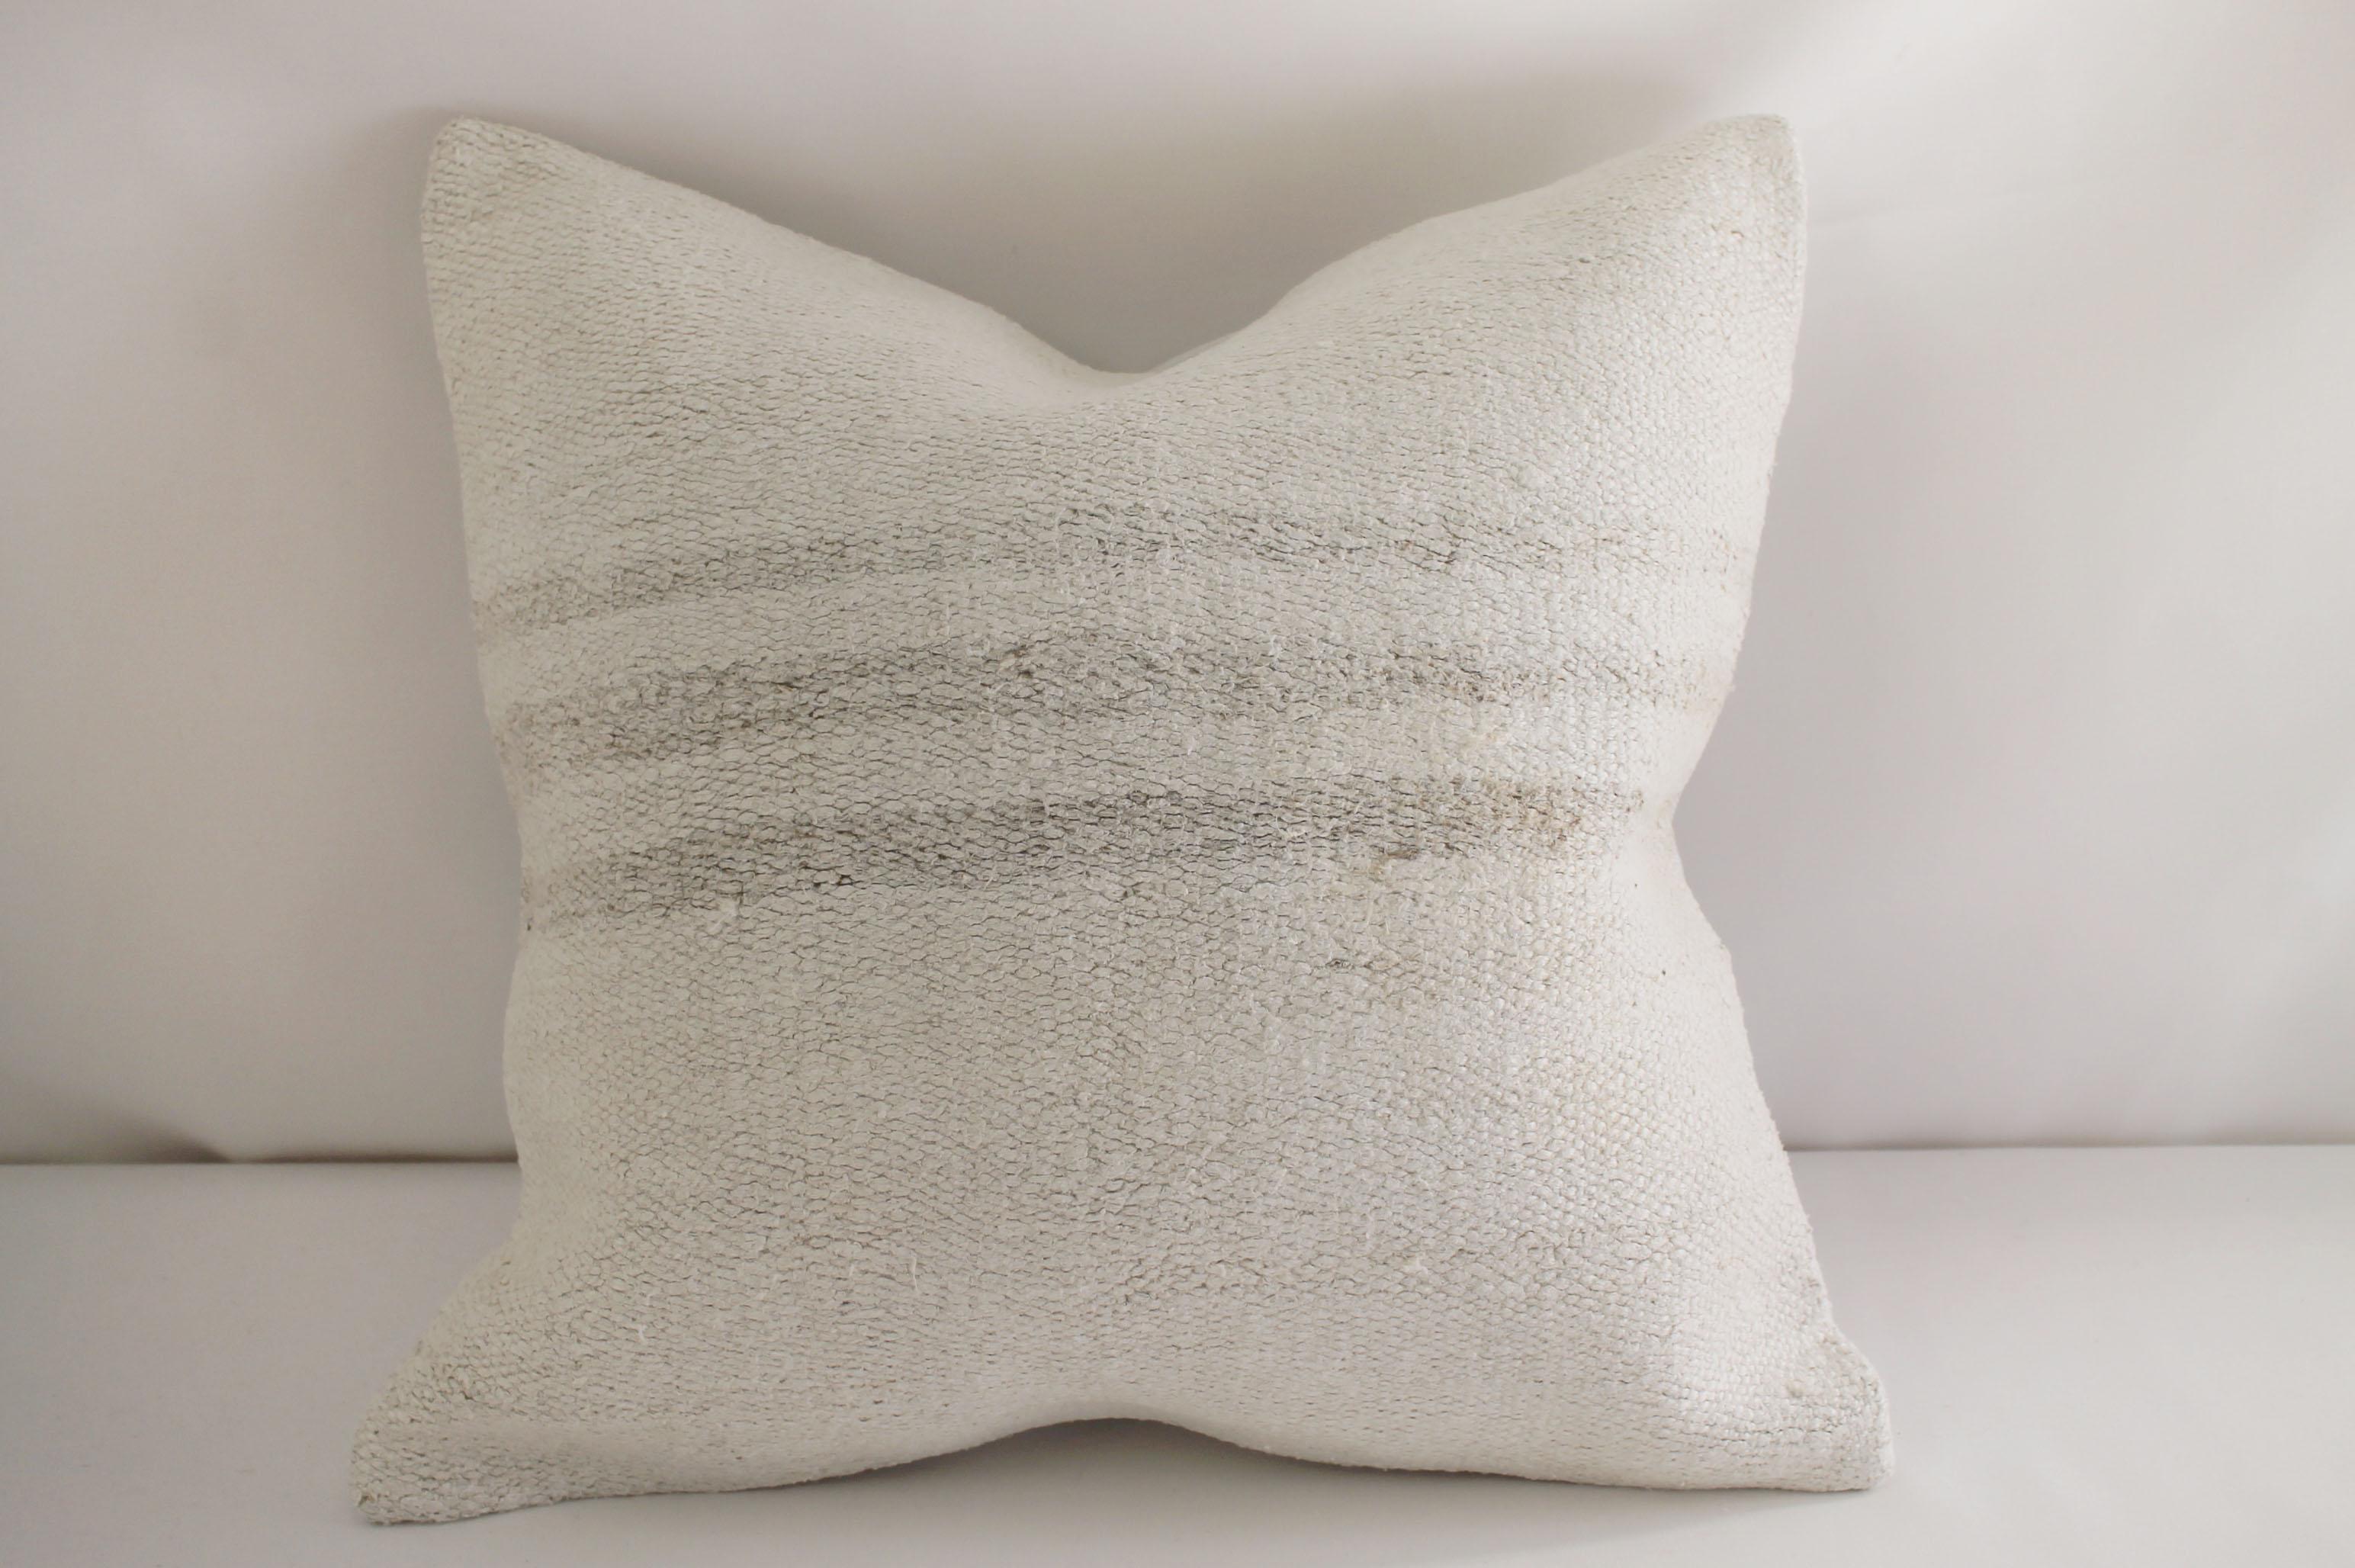 Vintage Turkish hemp rug pillow in off-white, light natural color with woven stripes on the face of the pillow. Beautiful original hemp rug, this portion has slightly darker natural stripes, backside is a coordinating fabric with zipper closure. No